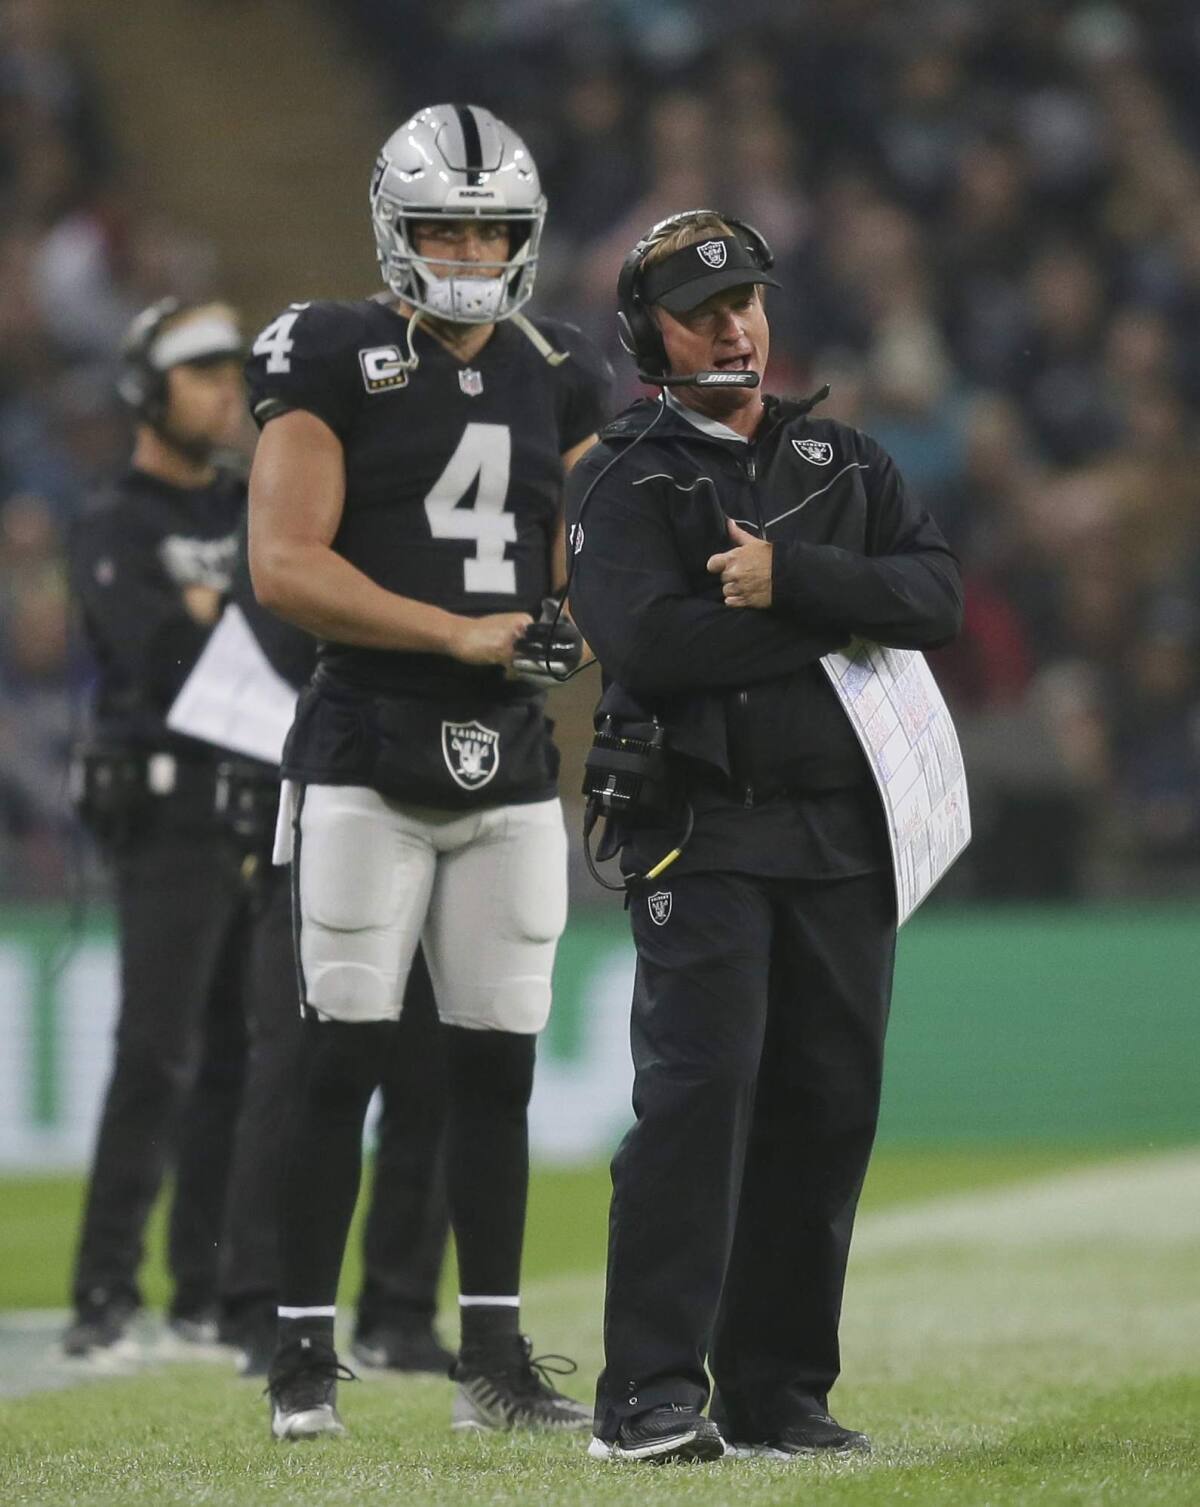 Jon Gruden: I get calls from players 'dying' to join Oakland Raiders